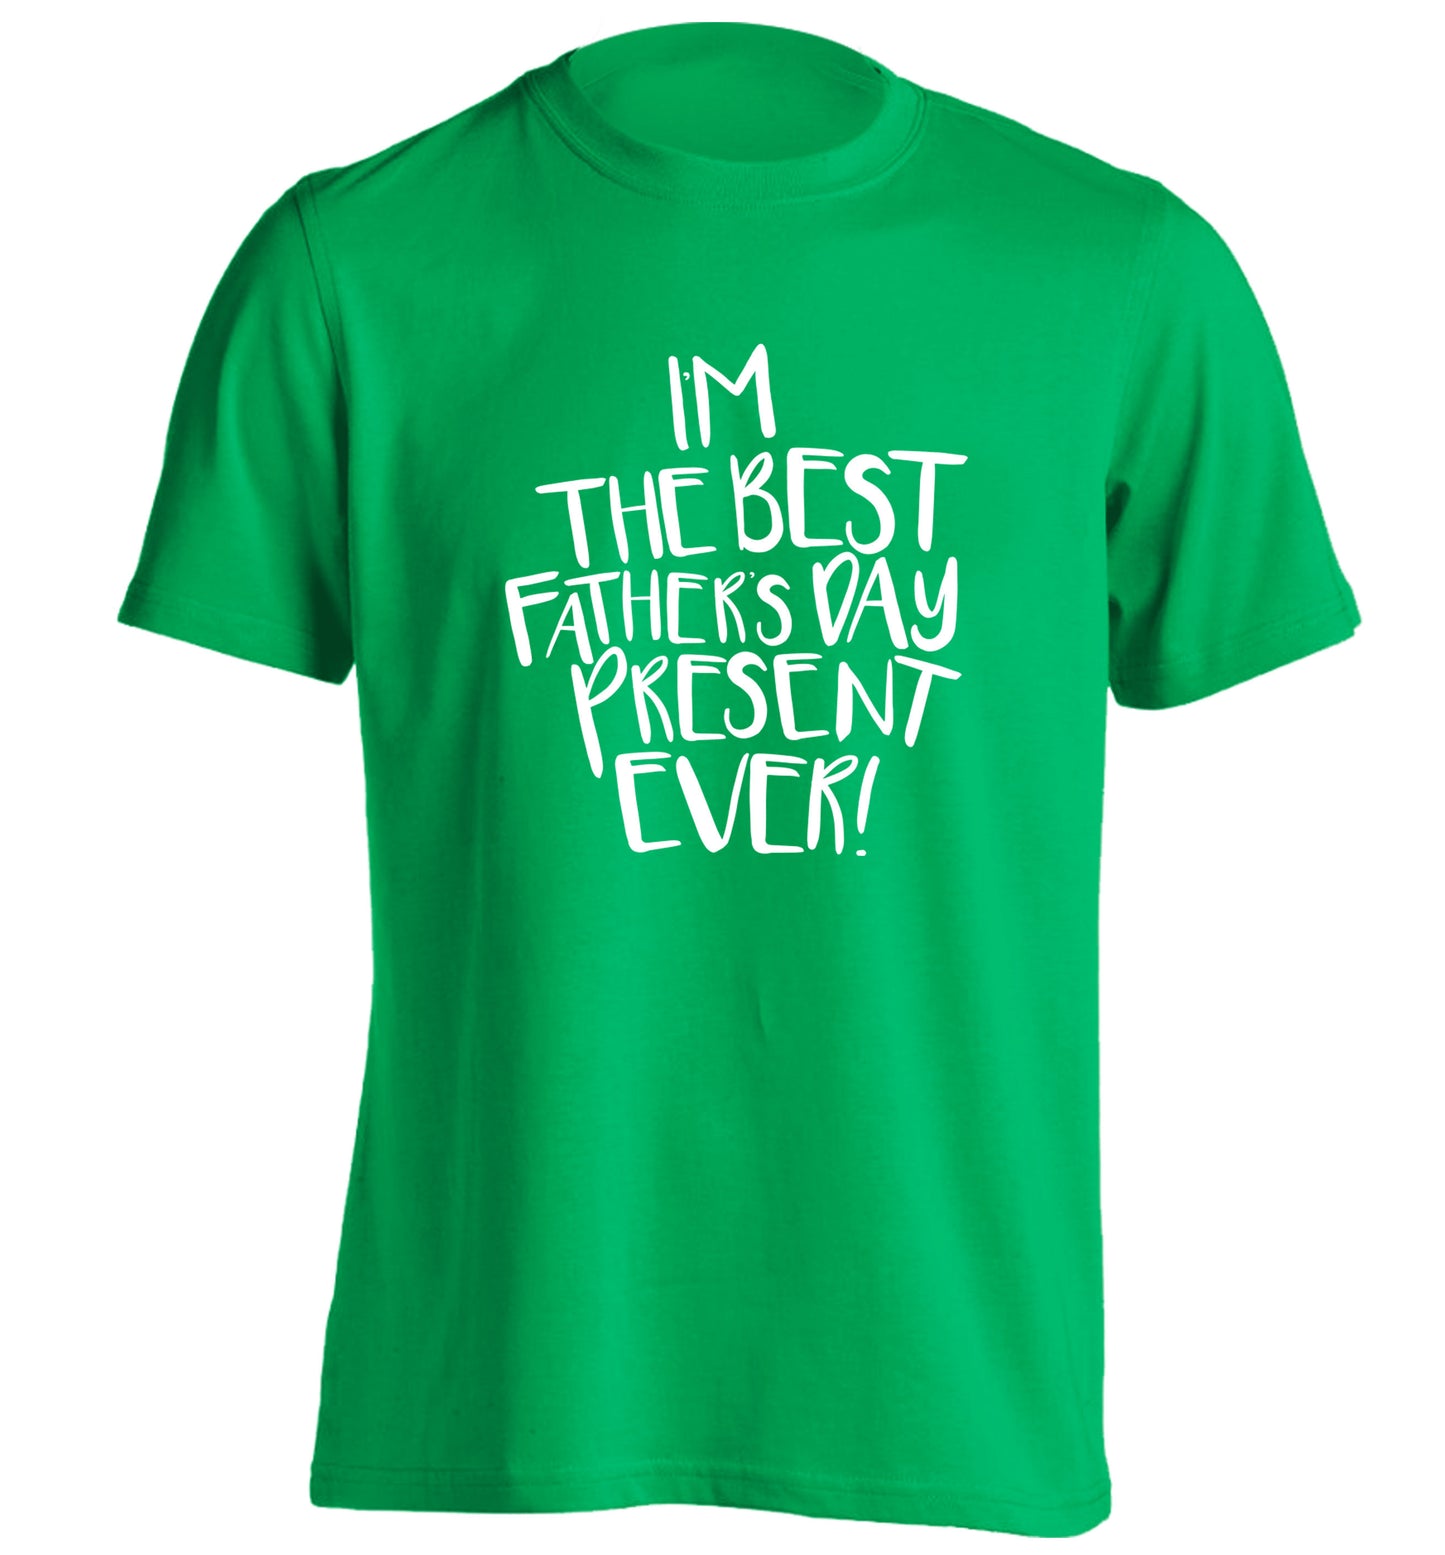 I'm the best father's day present ever! adults unisex green Tshirt 2XL